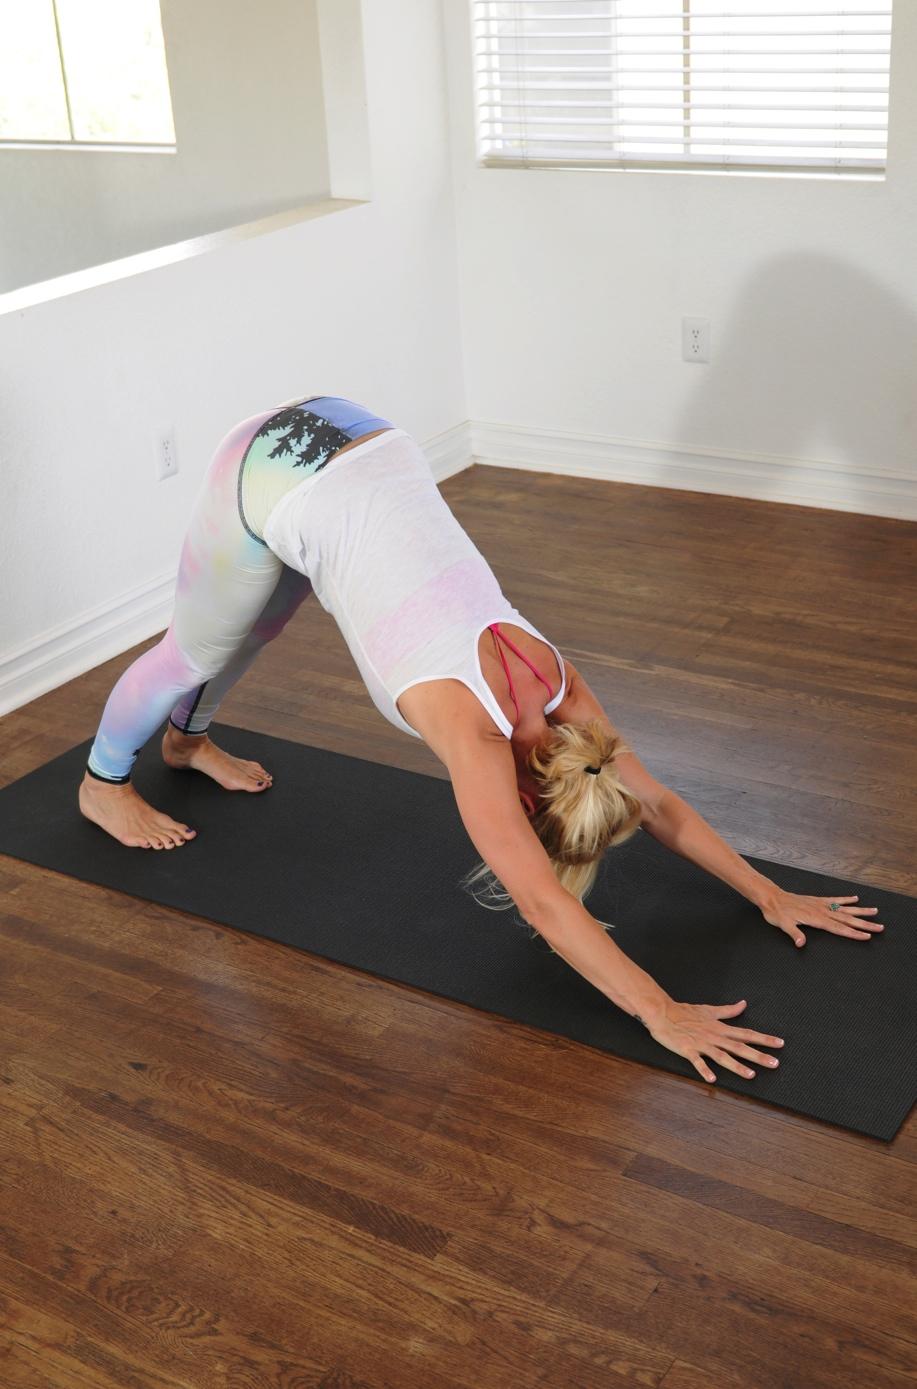 Down dog (Adho Mukha Svanasana) Benefits: Calms nervous system and helps relieve stress. Stretches shoulders, calves, hamstrings and arms. Improves digestion. Relieves insomnia, back pain and fatigue.